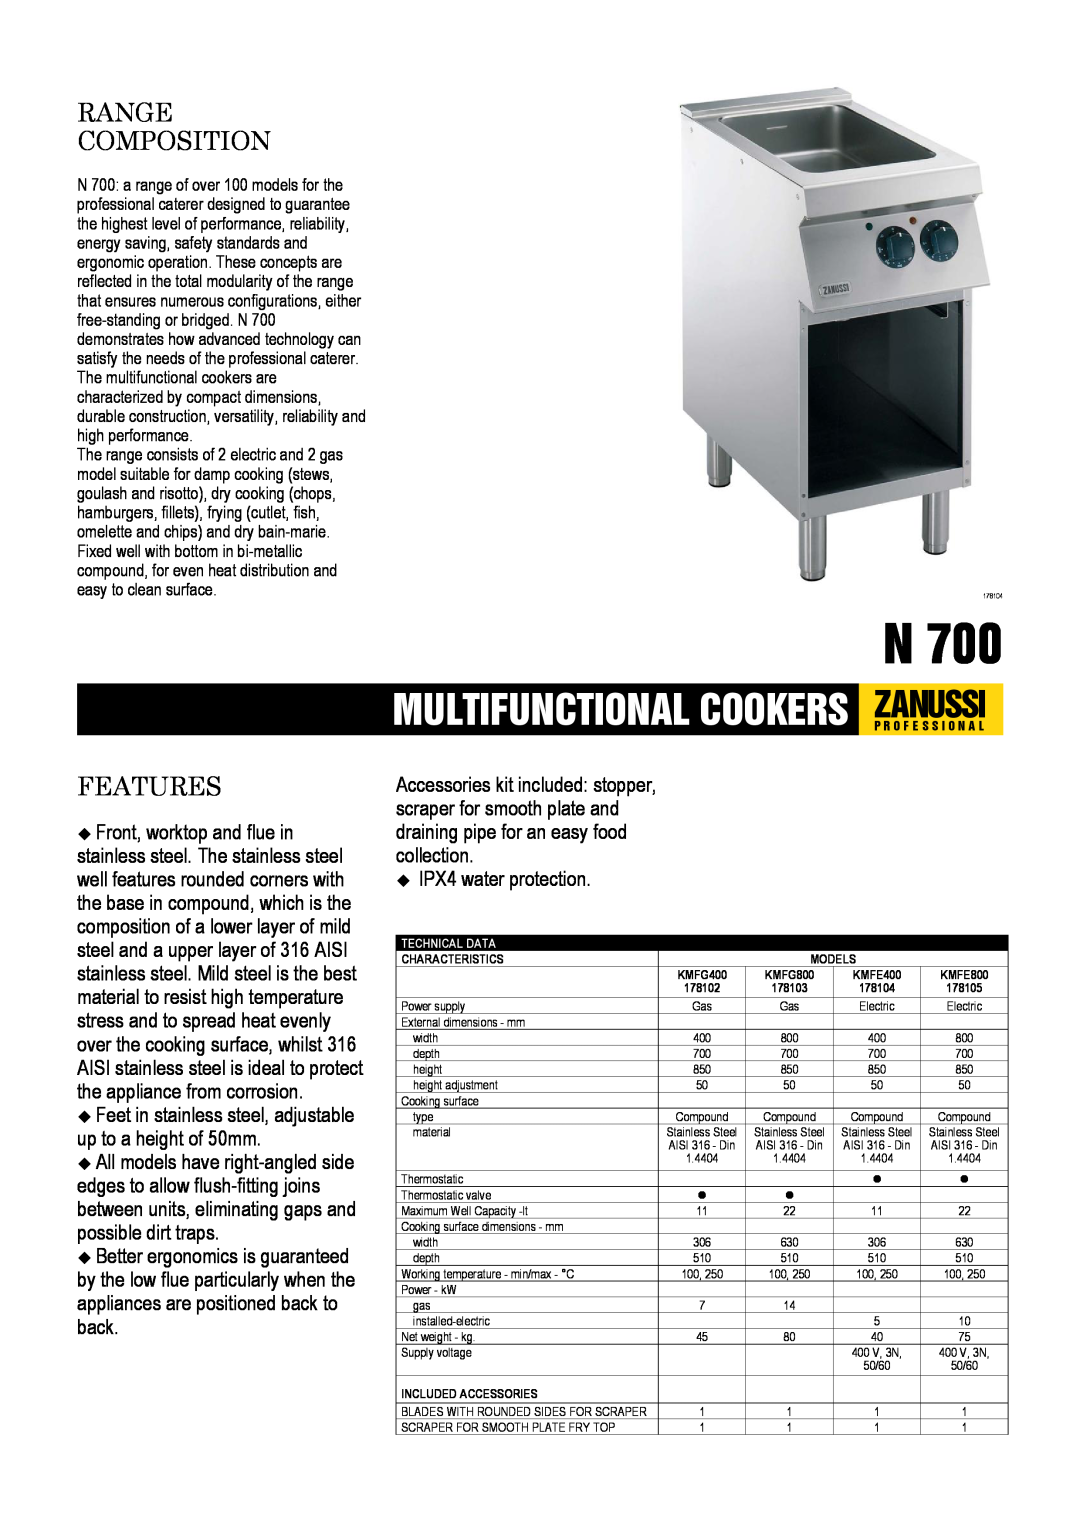 Zanussi KMFG800 dimensions Zanussi, Range Composition, Features, edges to allow flush-fittingjoins, IPX4 water protection 